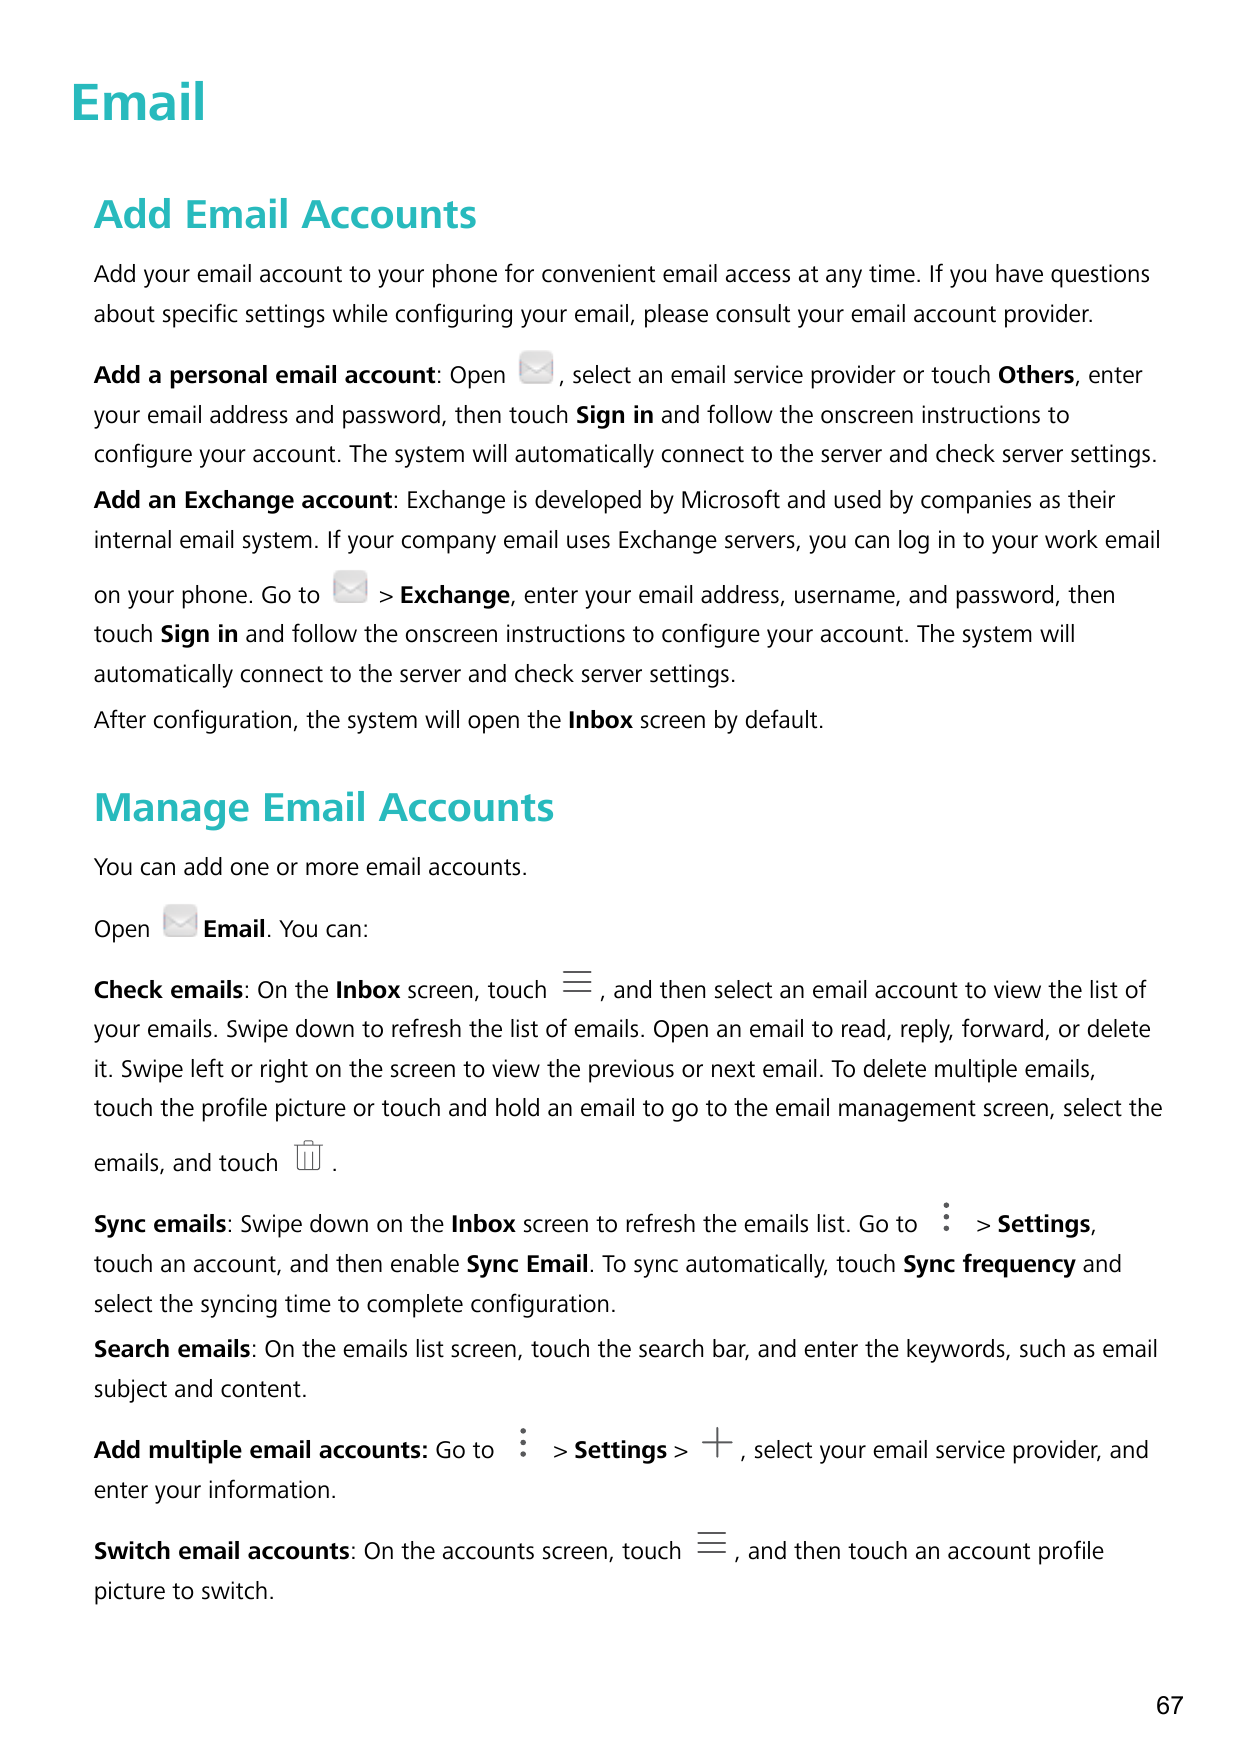 EmailAdd Email AccountsAdd your email account to your phone for convenient email access at any time. If you have questionsabout 